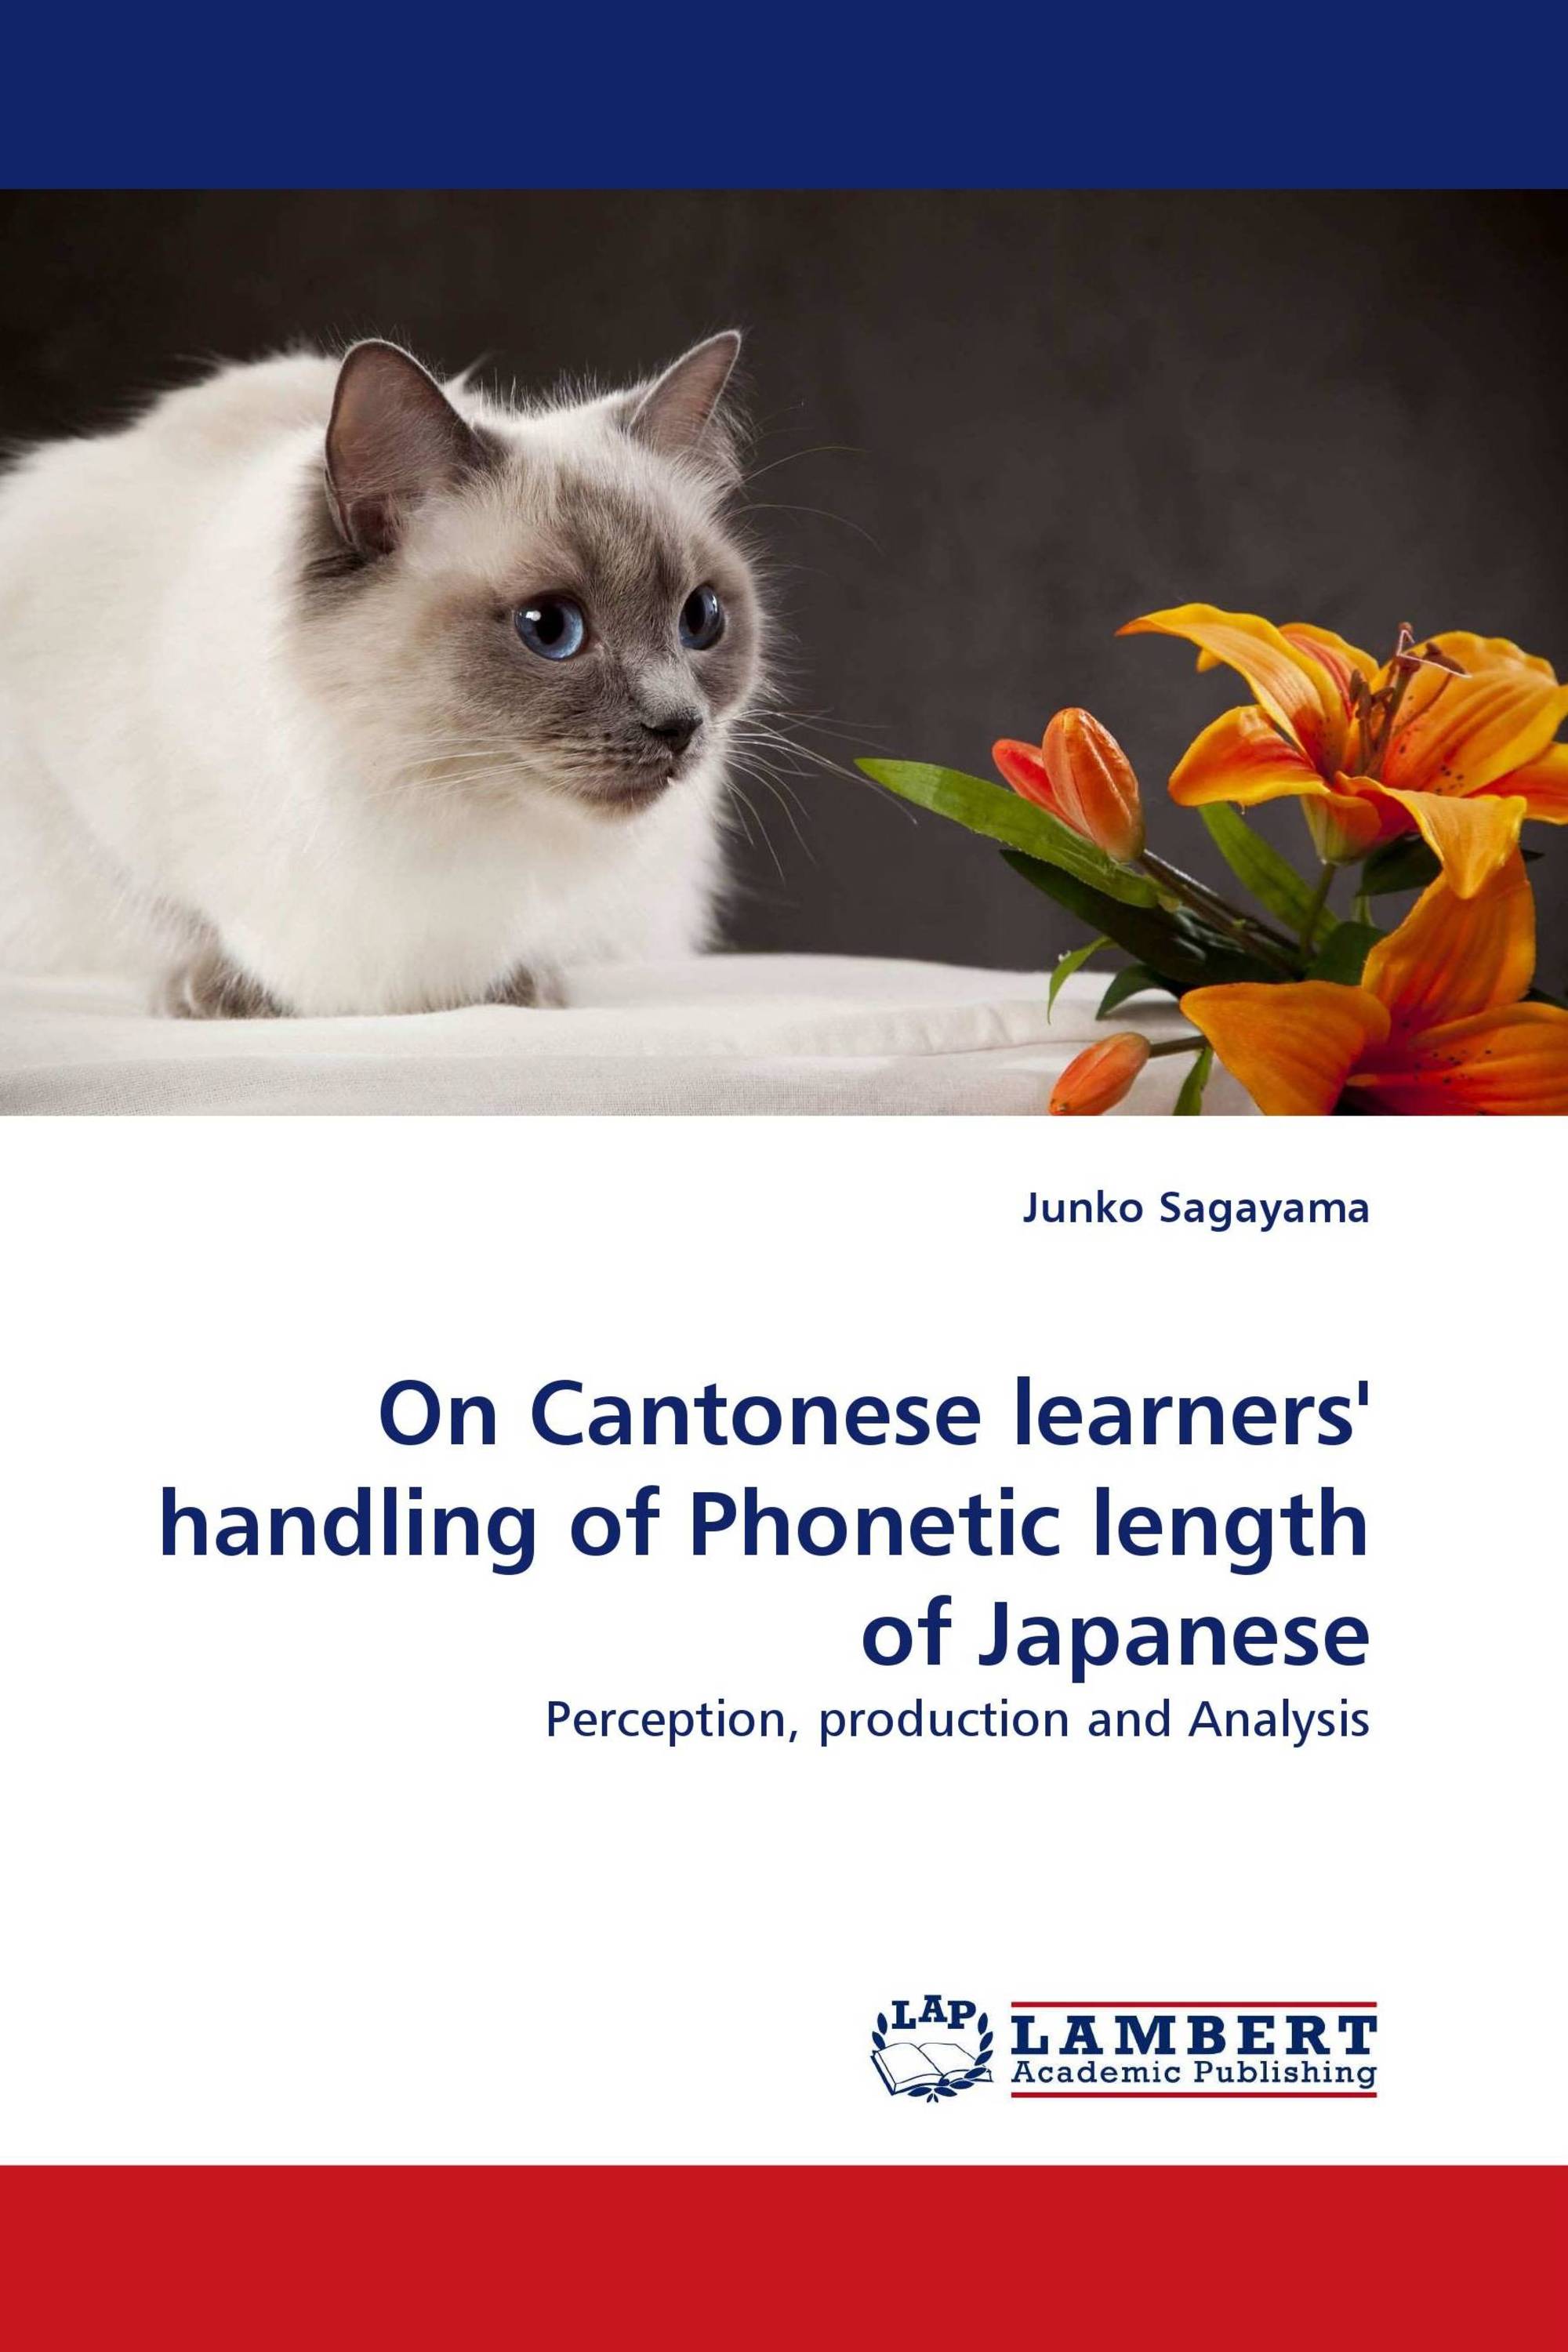 On Cantonese learners'' handling of Phonetic length of Japanese